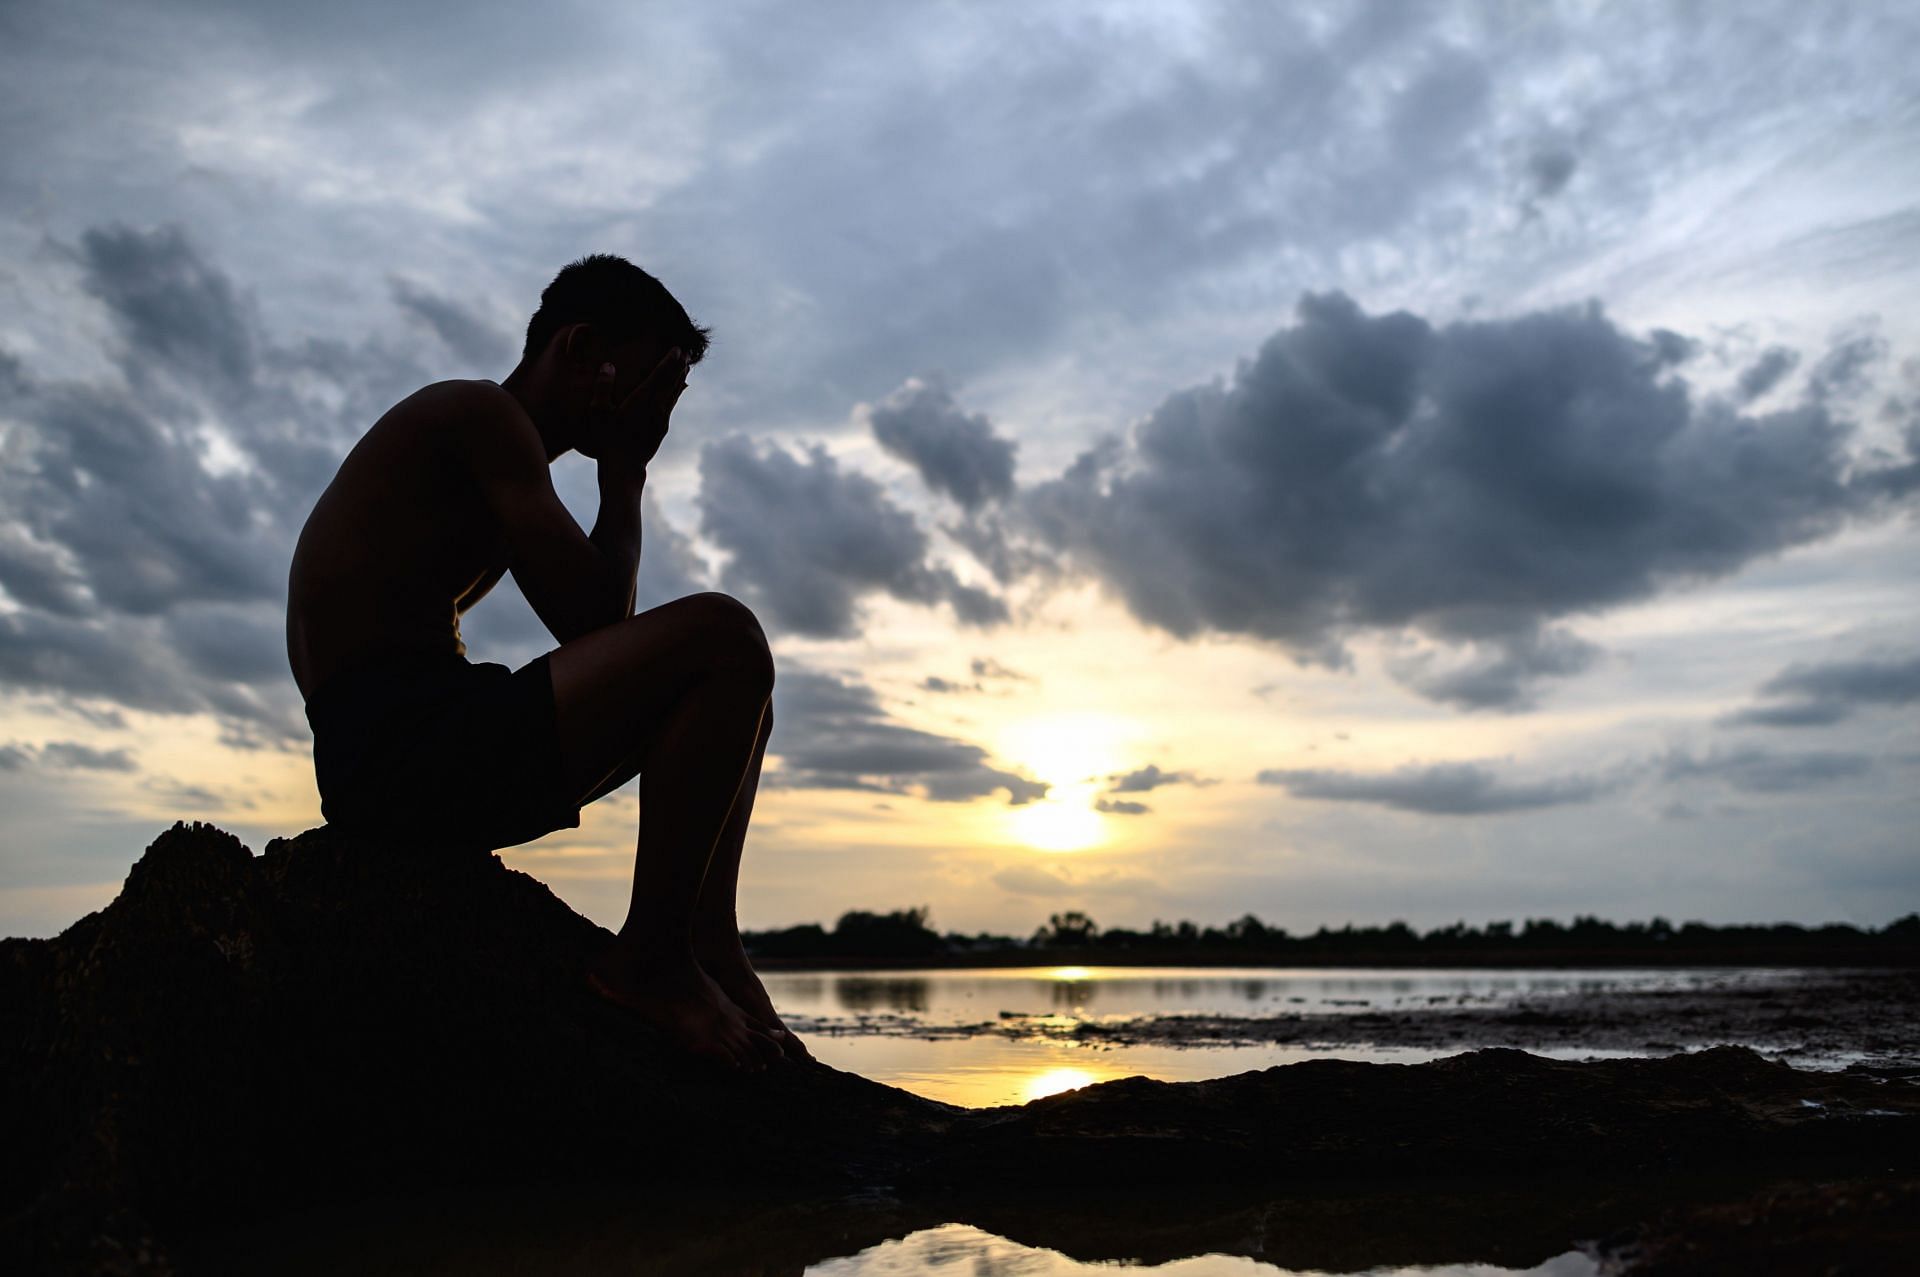 Depression is a common symptom of the crisis that you may experience (Image via Freepik/ Jcomp)